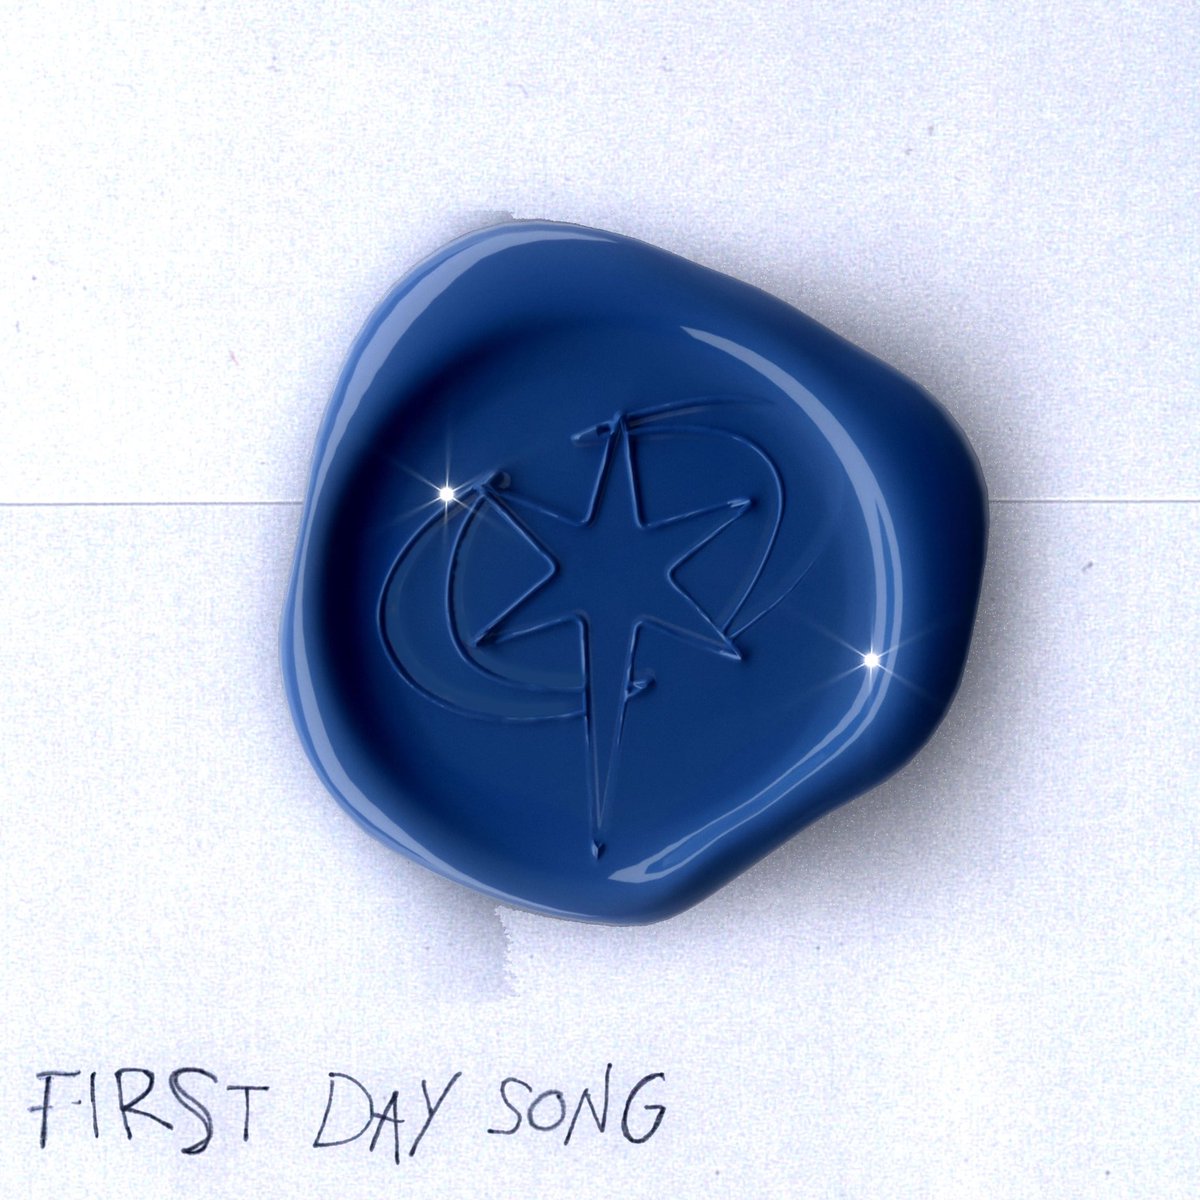 Cover art for『Age Factory - First day song』from the release『First day song